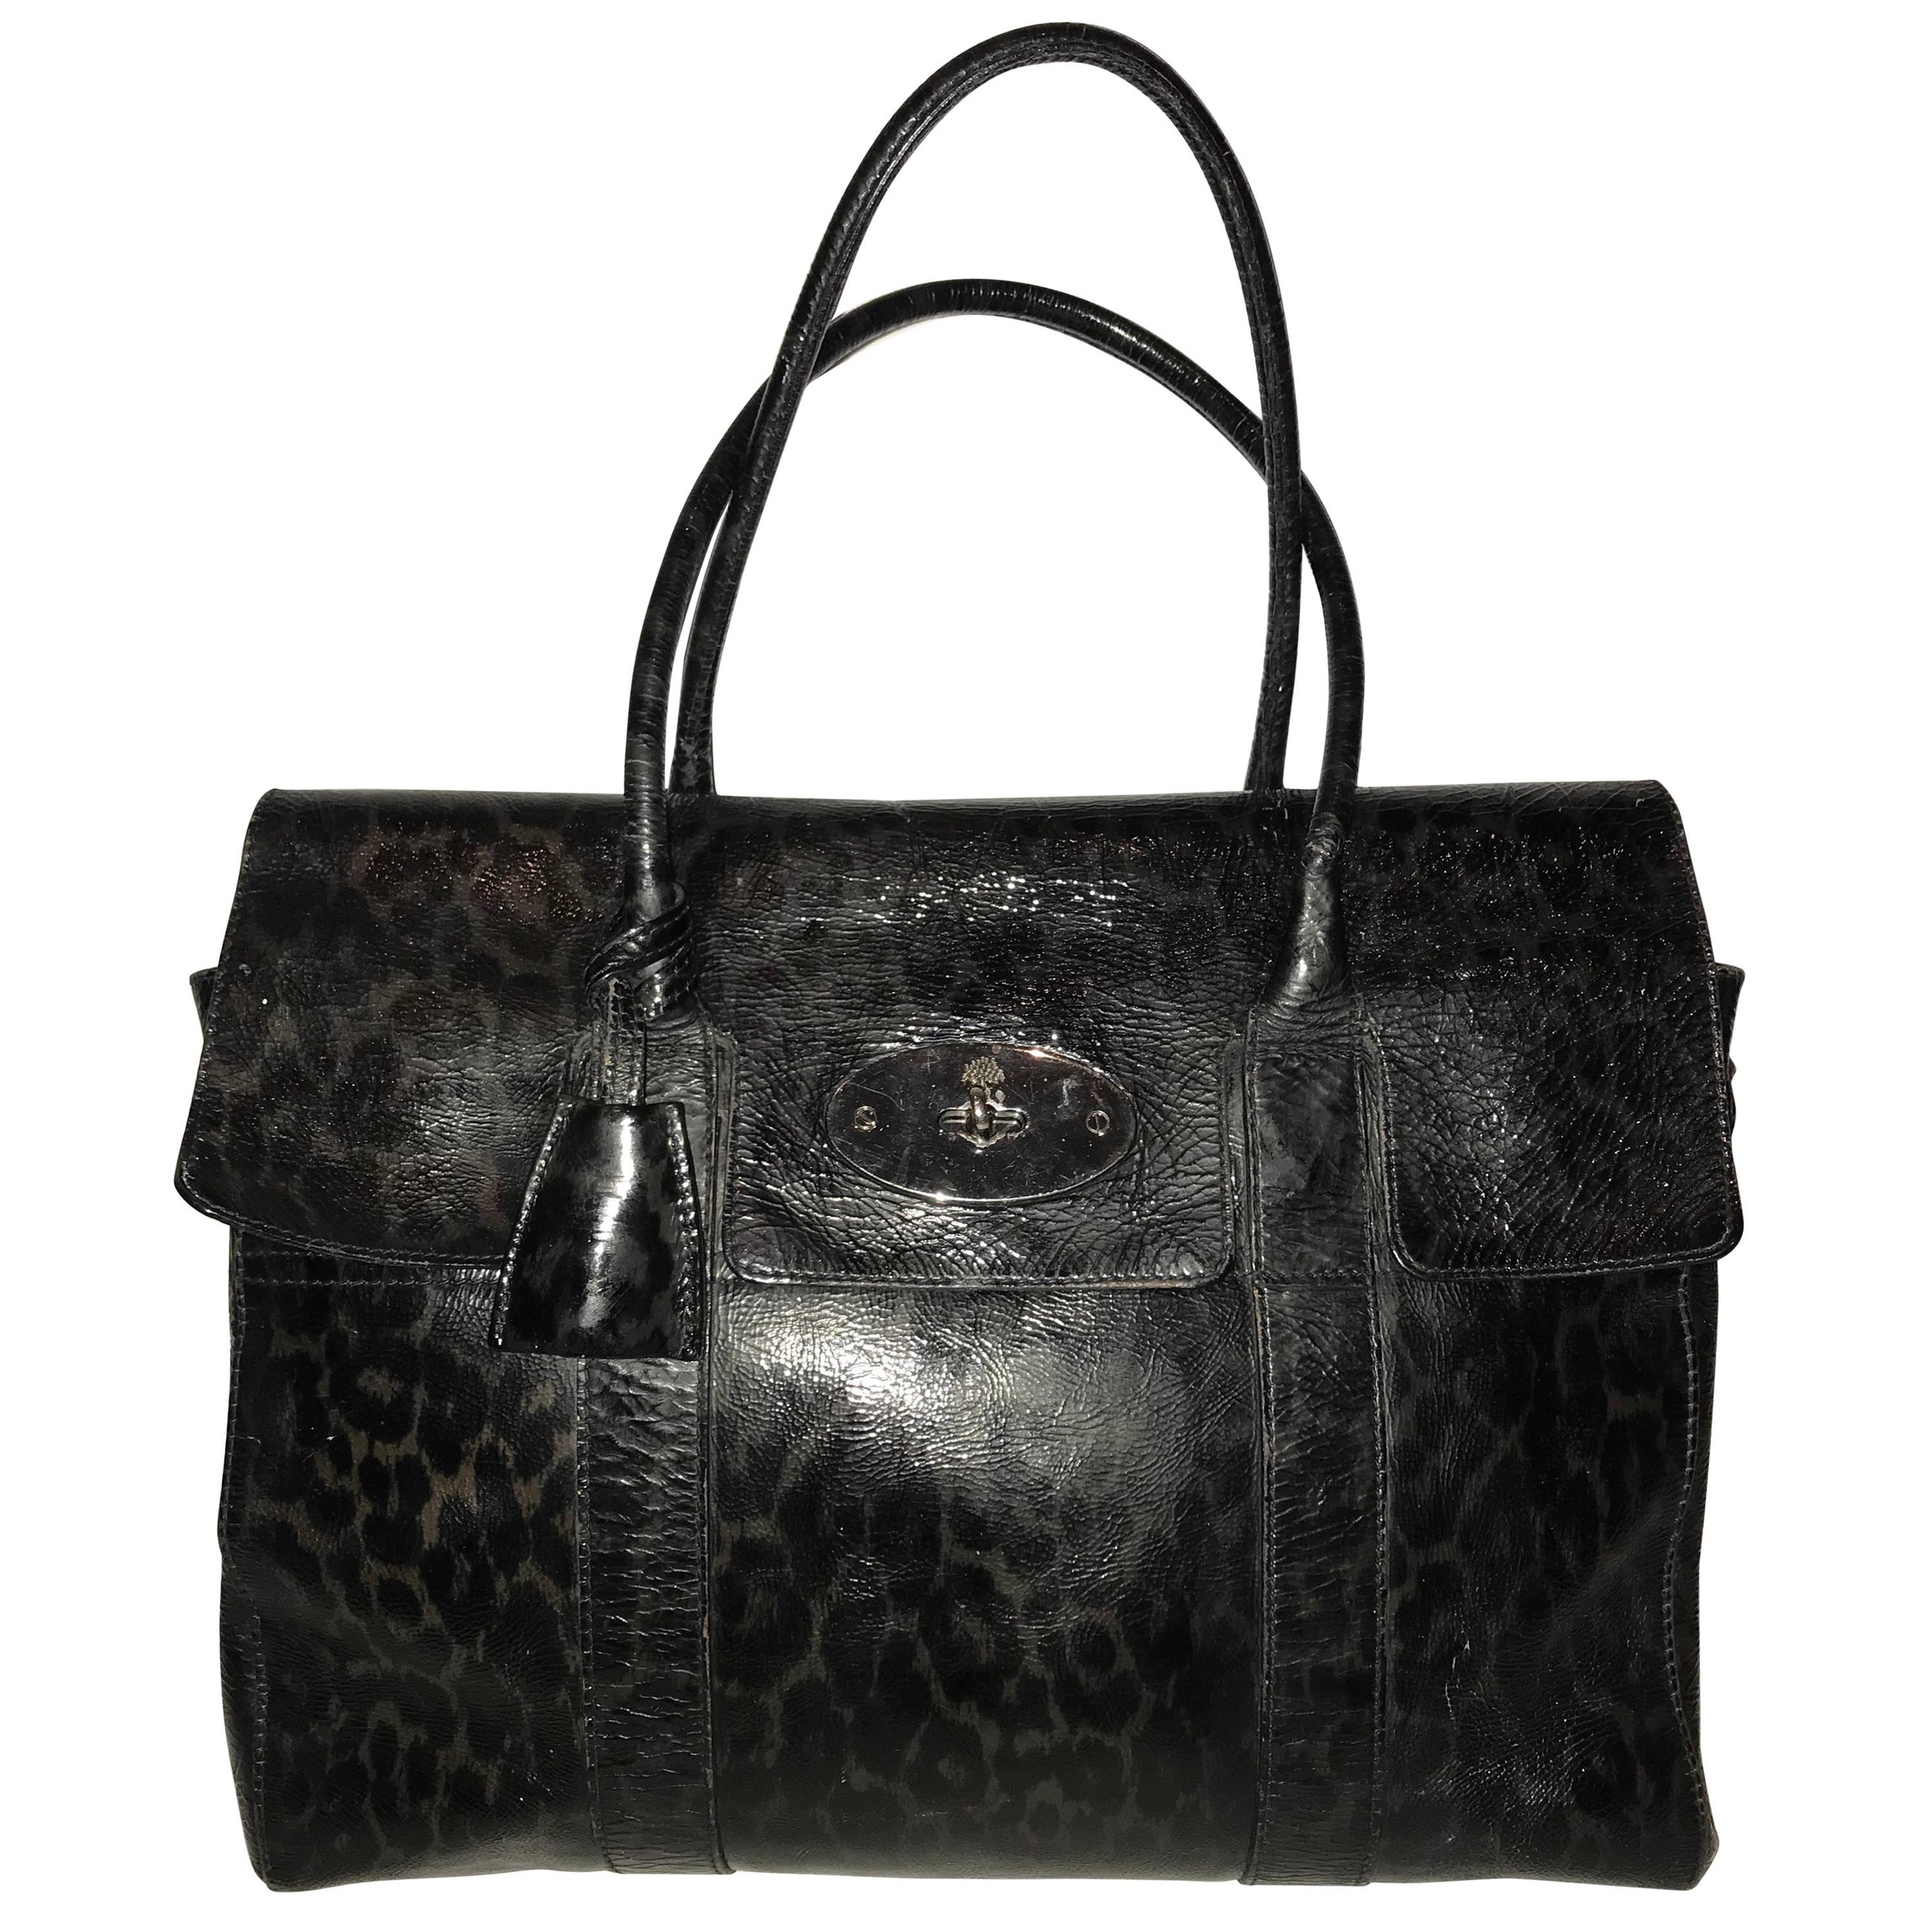 A Mulberry bayswater satchel bag in leopard print patent leather tote blue/black